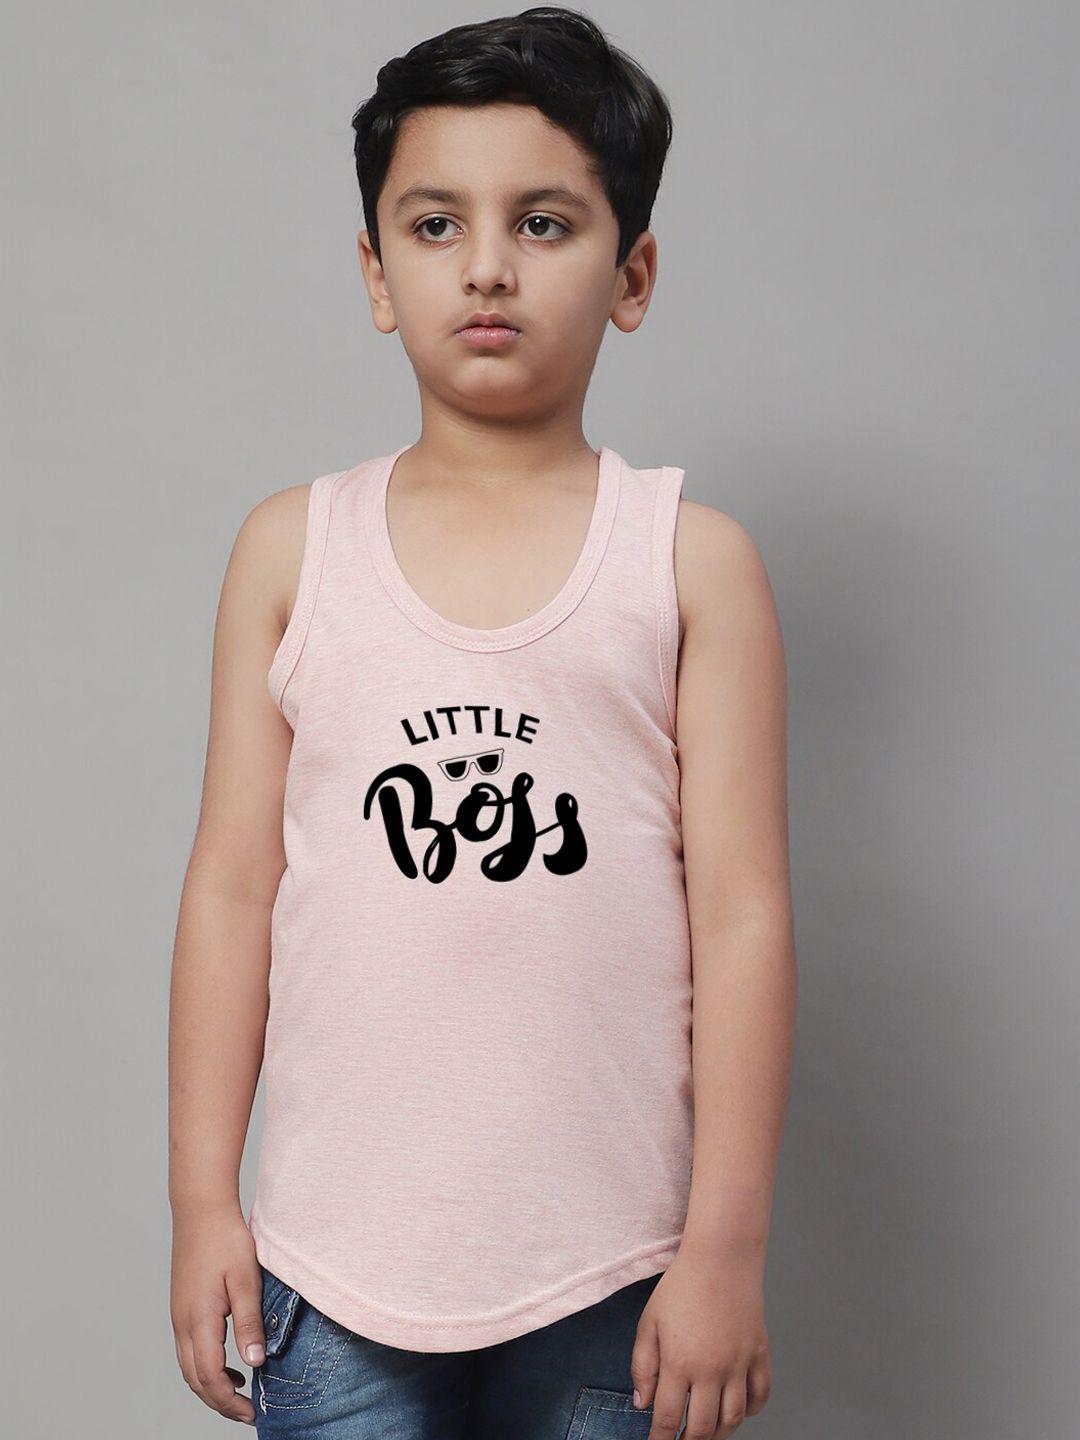 friskers boys printed pure cotton sleeveless basic vests